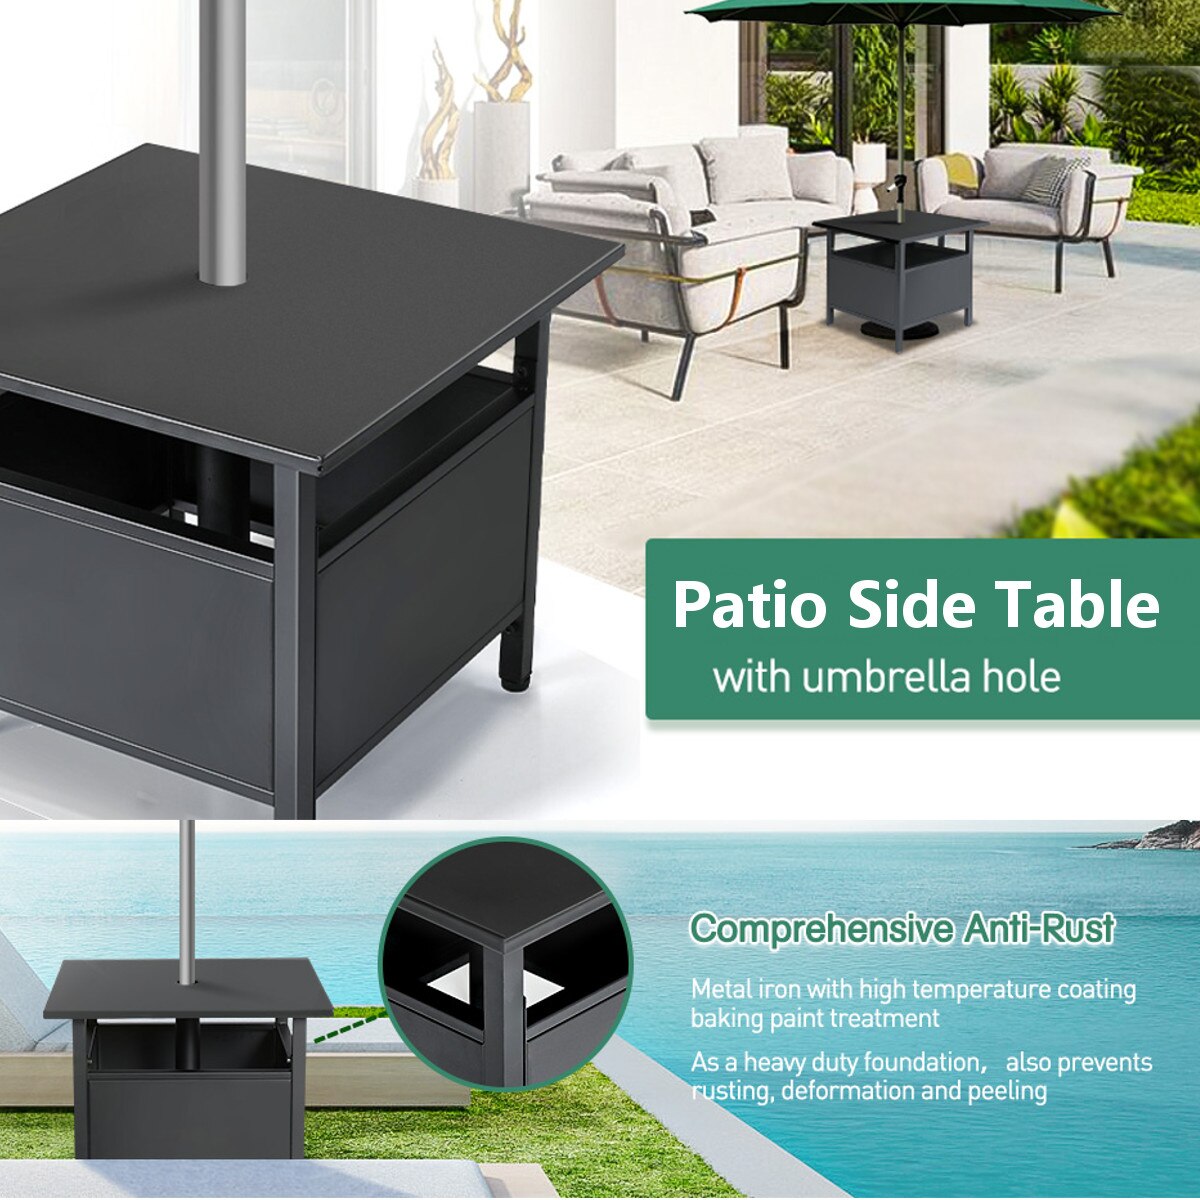 Patio Side Table With Umbrella